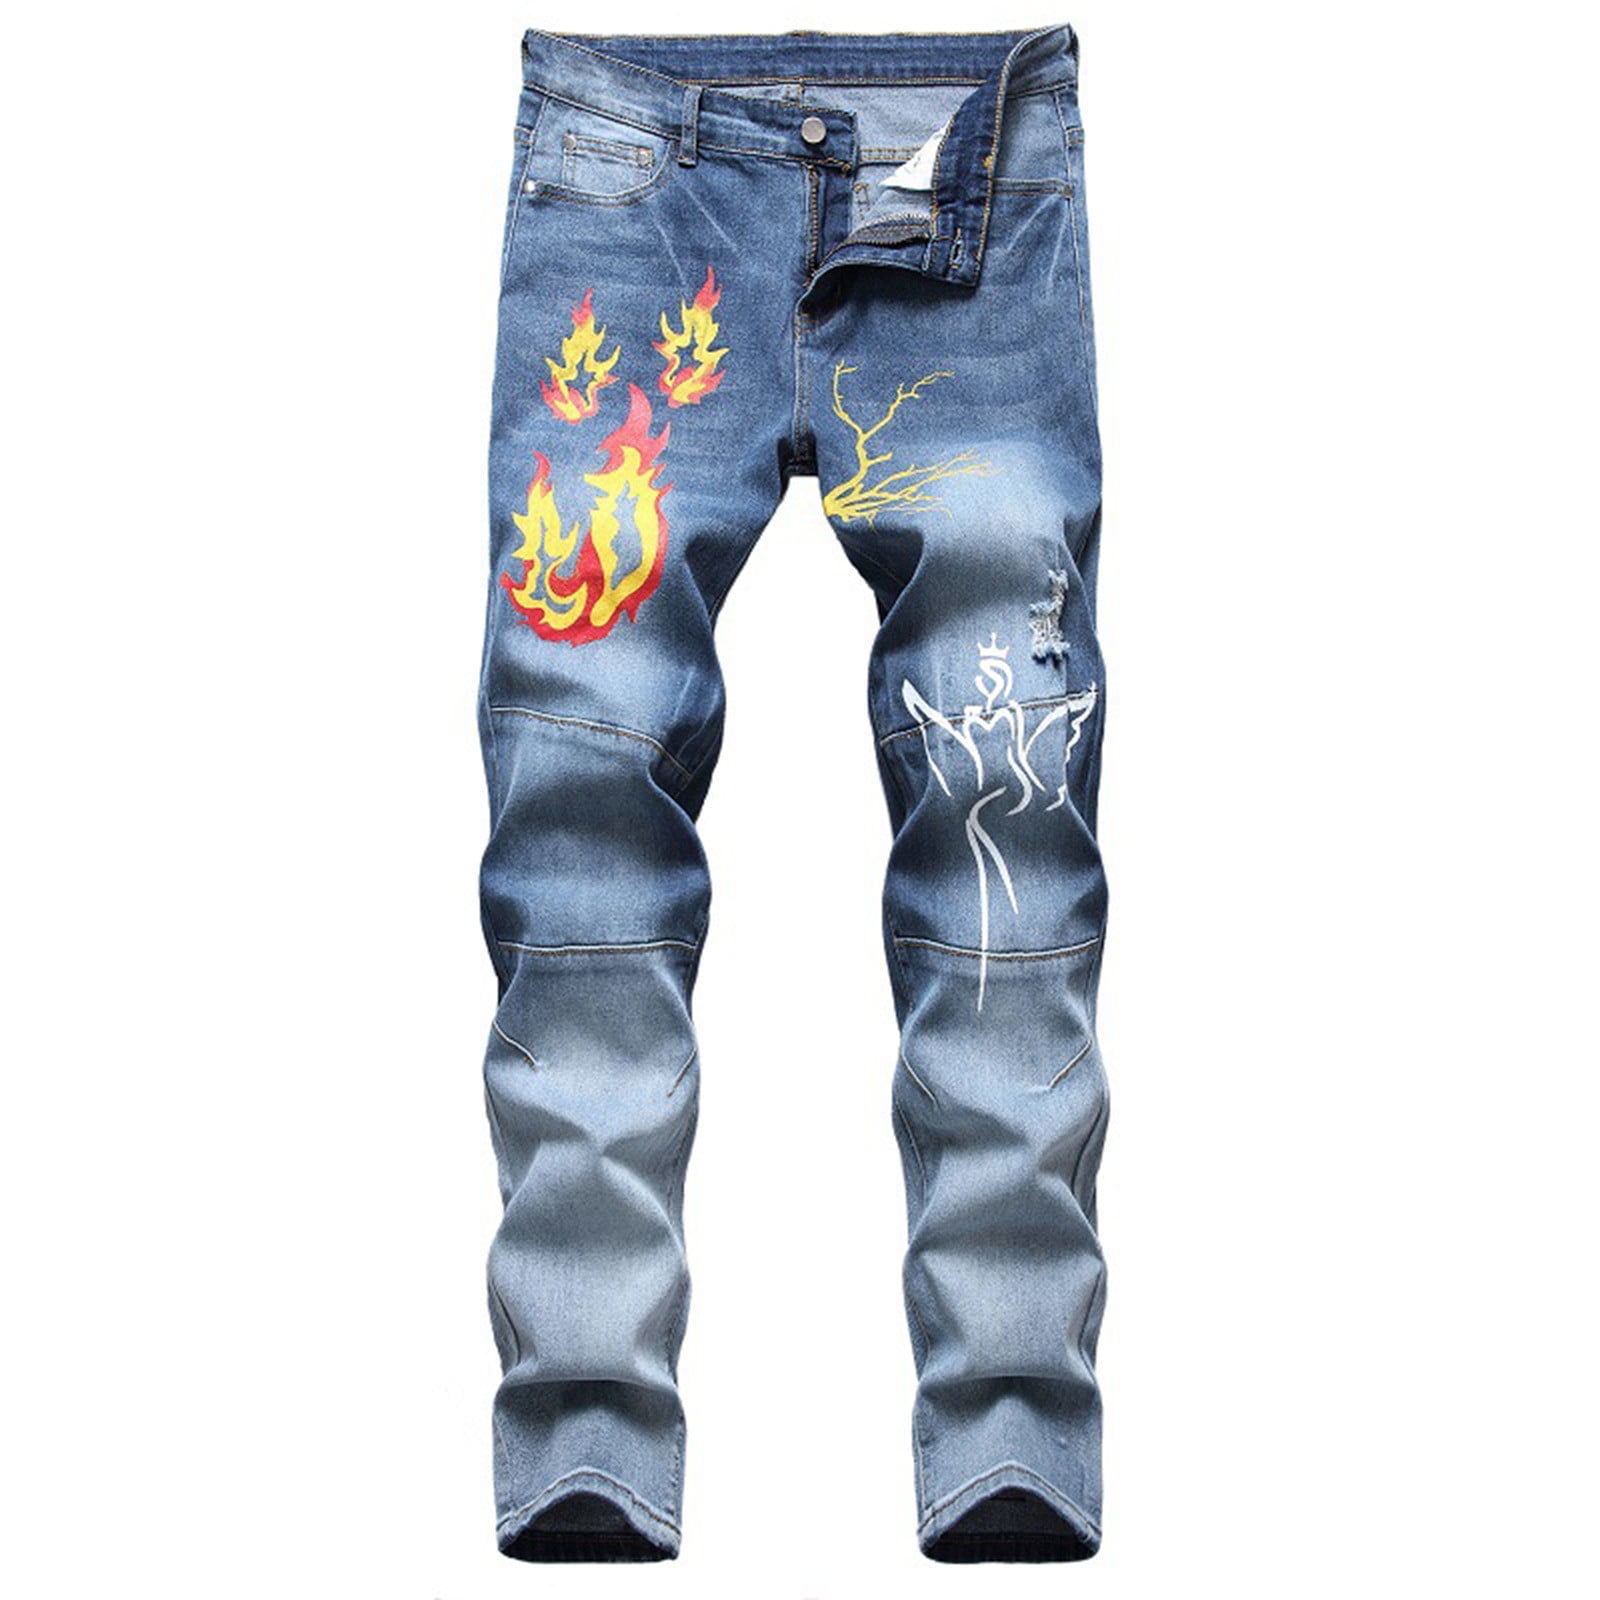 SSAAVKUY Men's High Waist Ripped Jeans Slim Fit Casual Distressed Denim ...